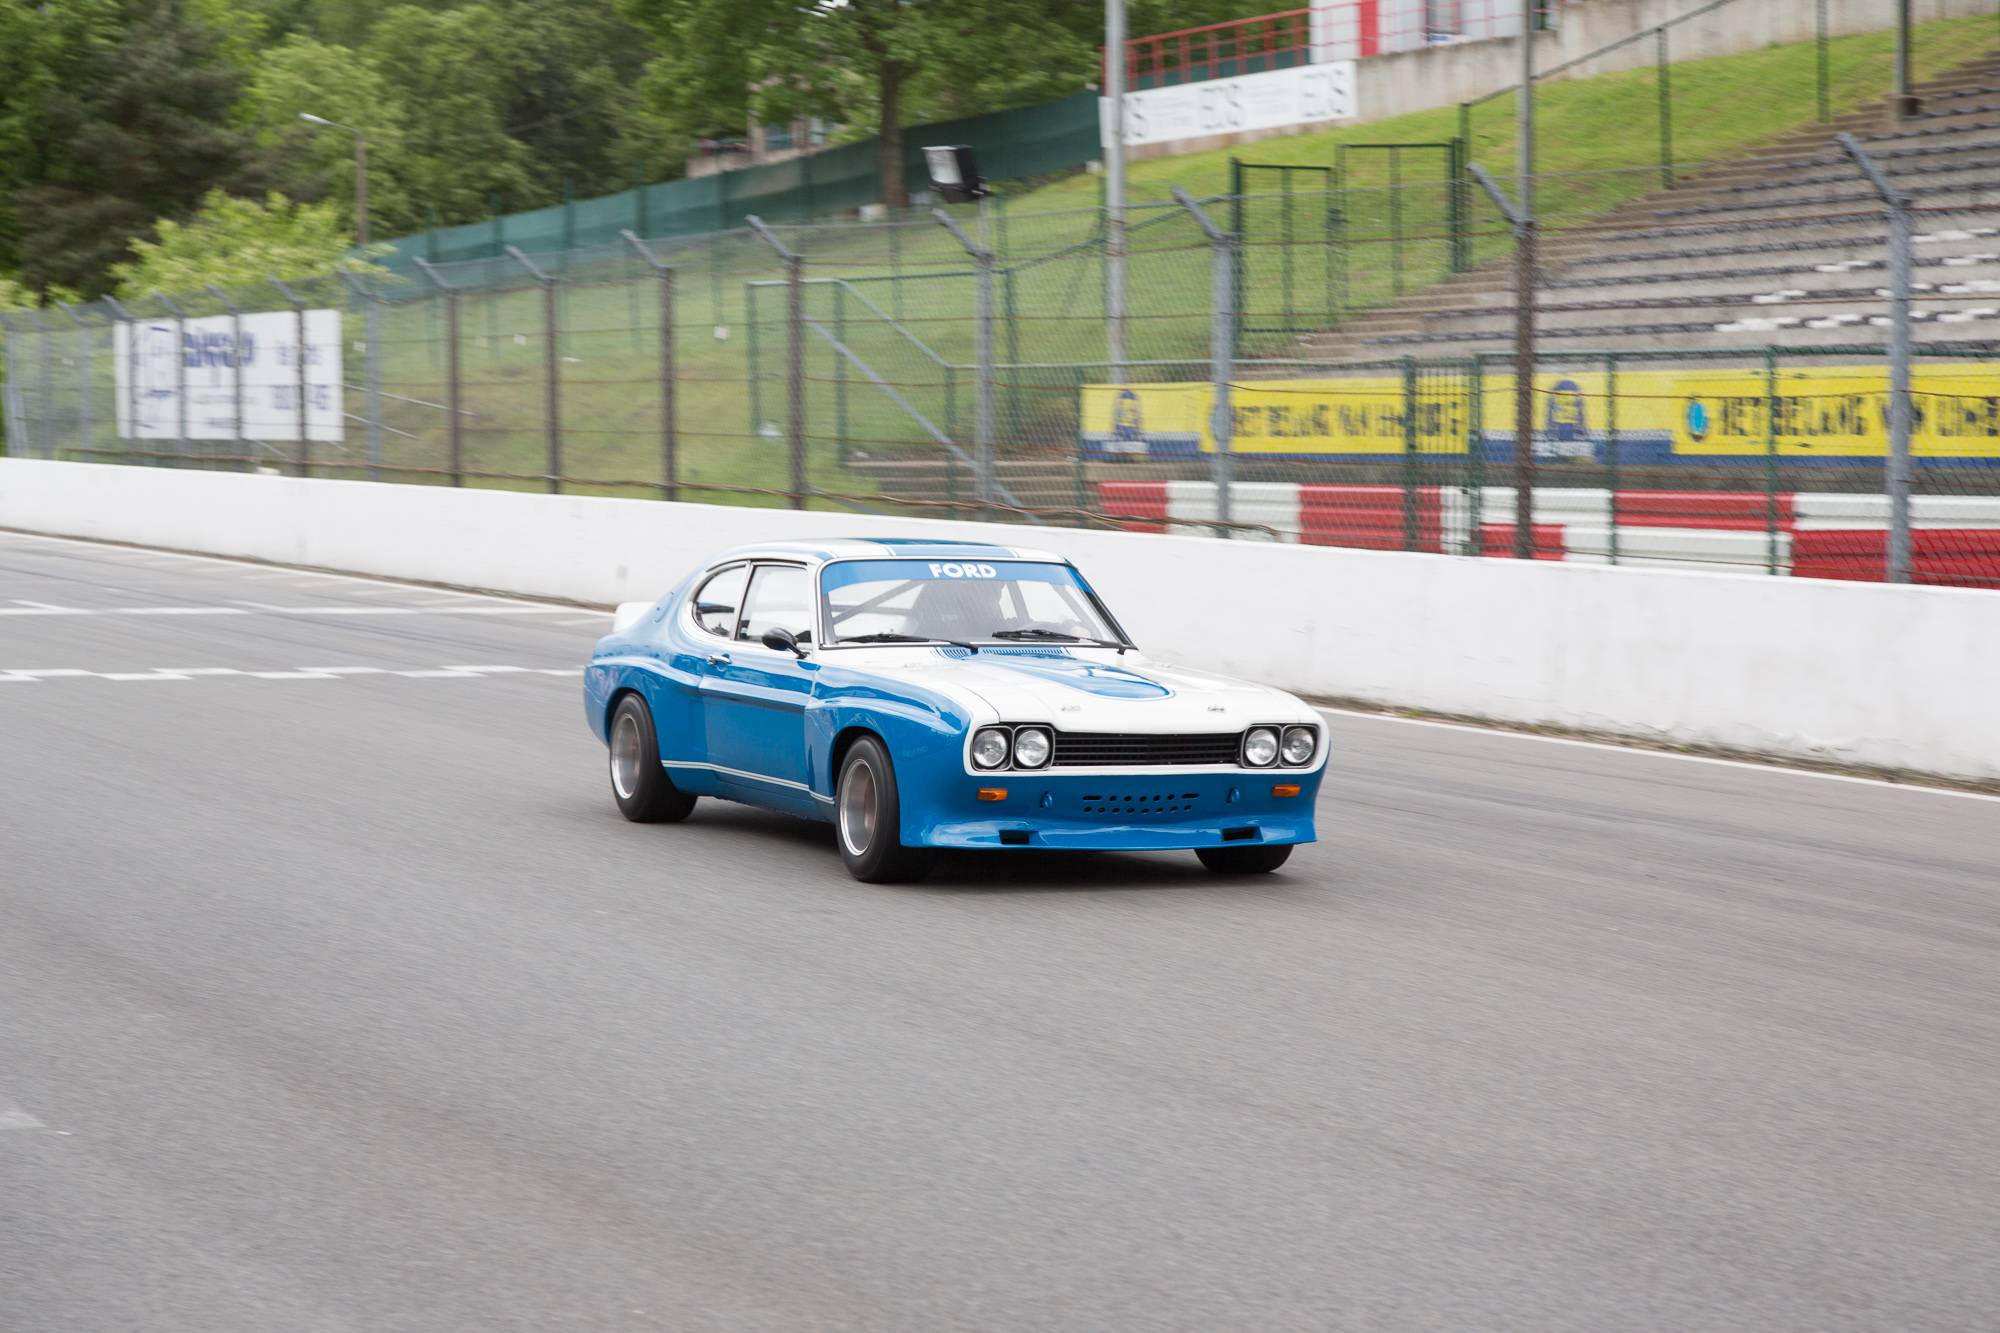 Ford Circuit Zolder